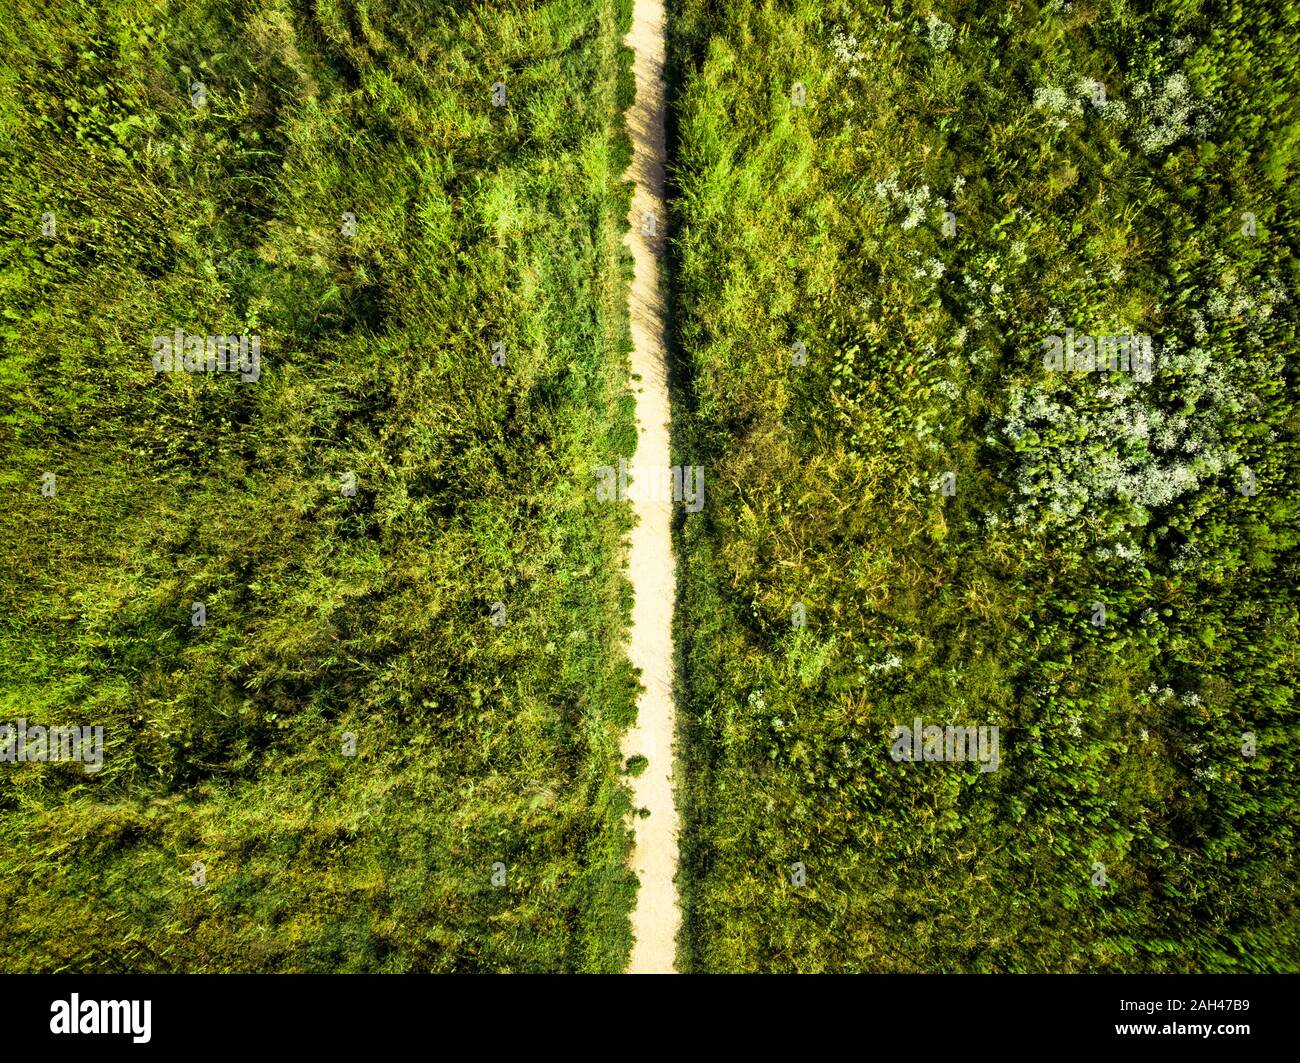 Germany, Berlin, Aerial view of empty dirt road in middle of green vegetation Stock Photo